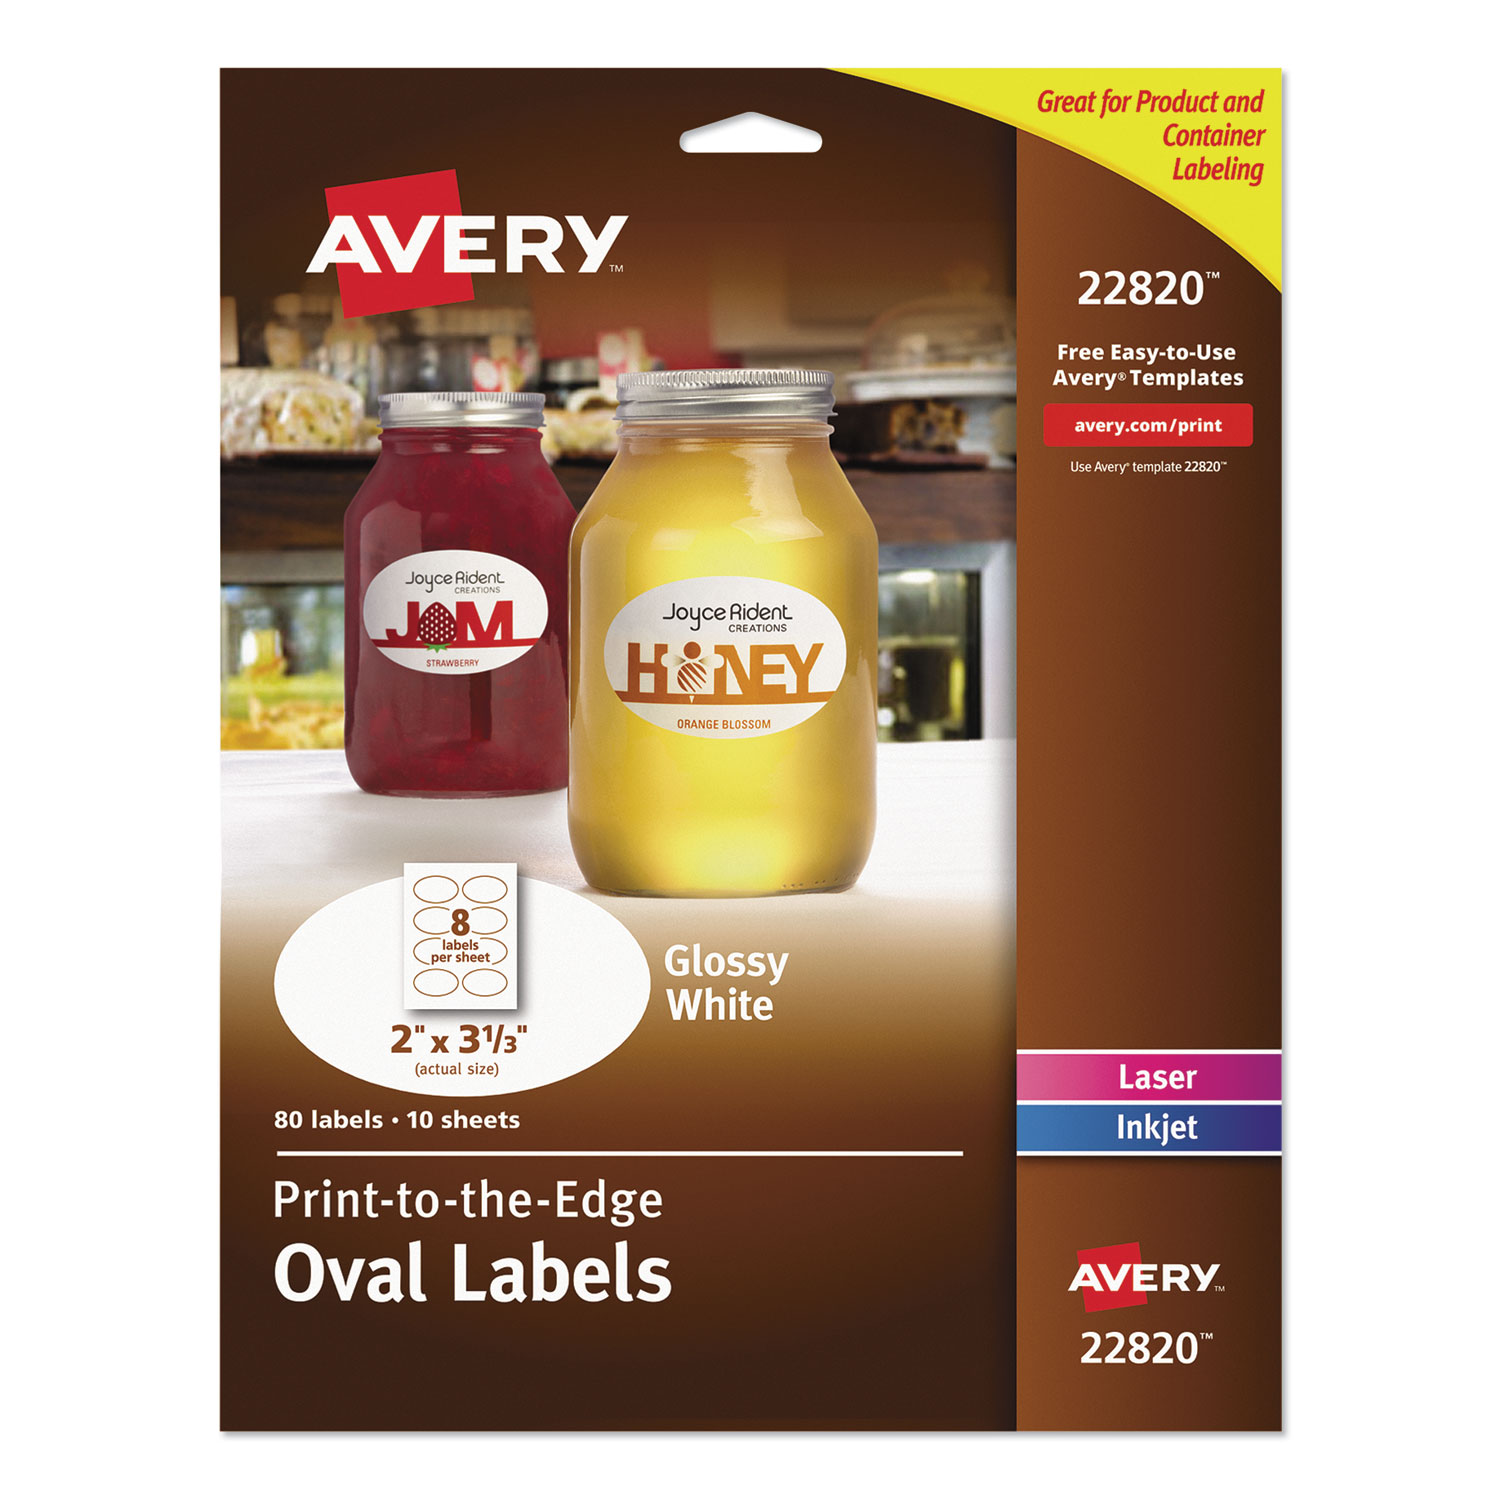  Avery 22820 Oval Labels w/ Sure Feed & Easy Peel, 2 x 3 1/3, Glossy White, 80/Pack (AVE22820) 